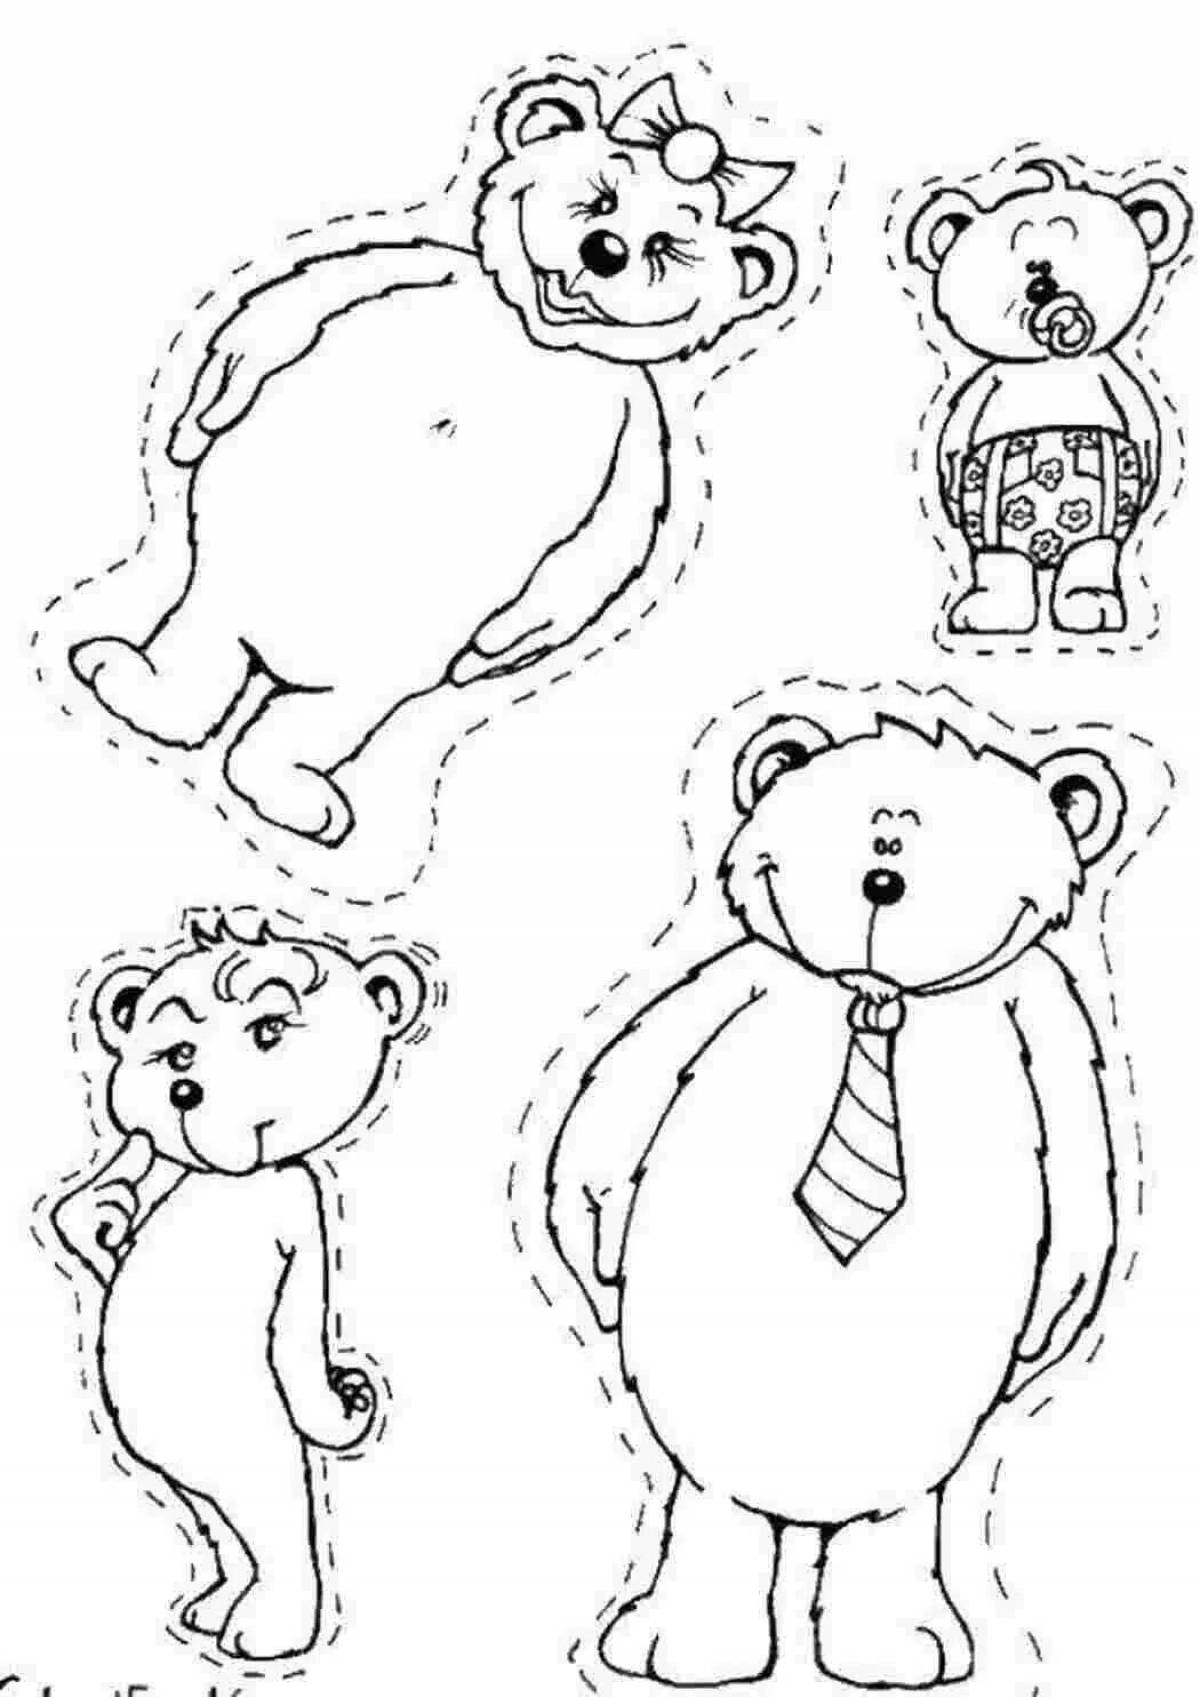 Furry bear family coloring page